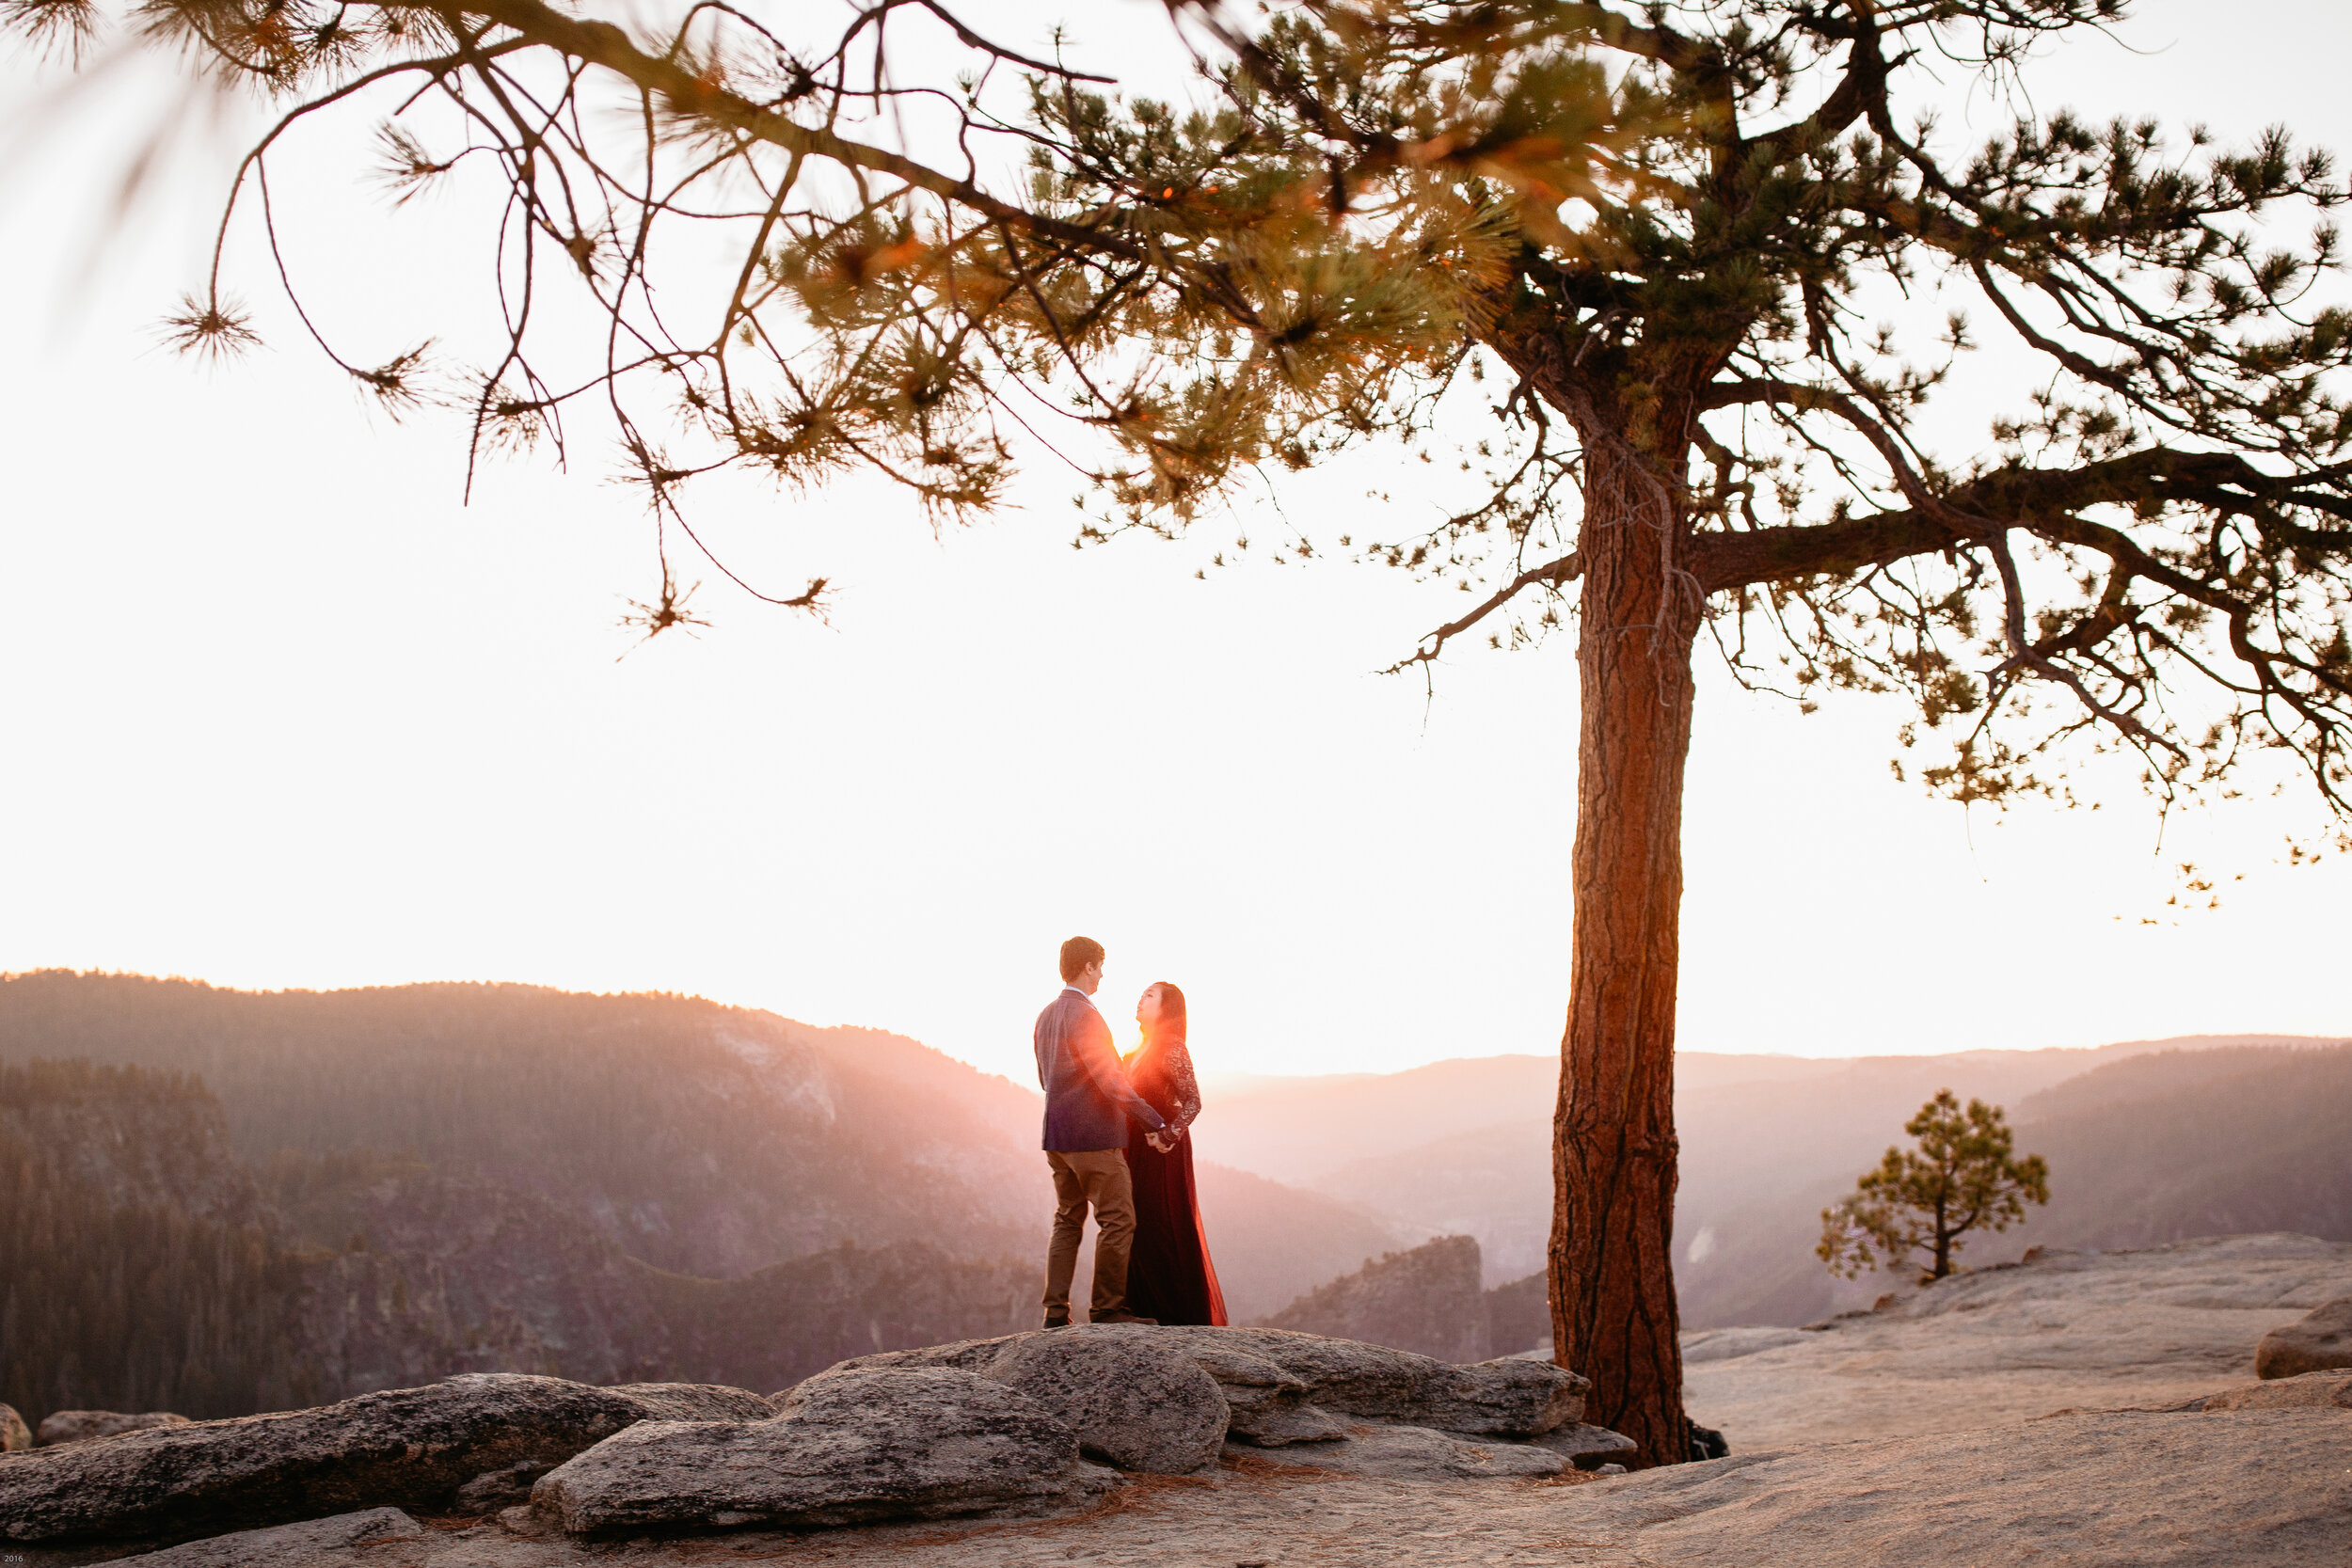 yosemite-national-park-couples-session-at-taft-point-and-yosemite-valley-yosemite-elopement-photographer-nicole-daacke-photography-168.jpg